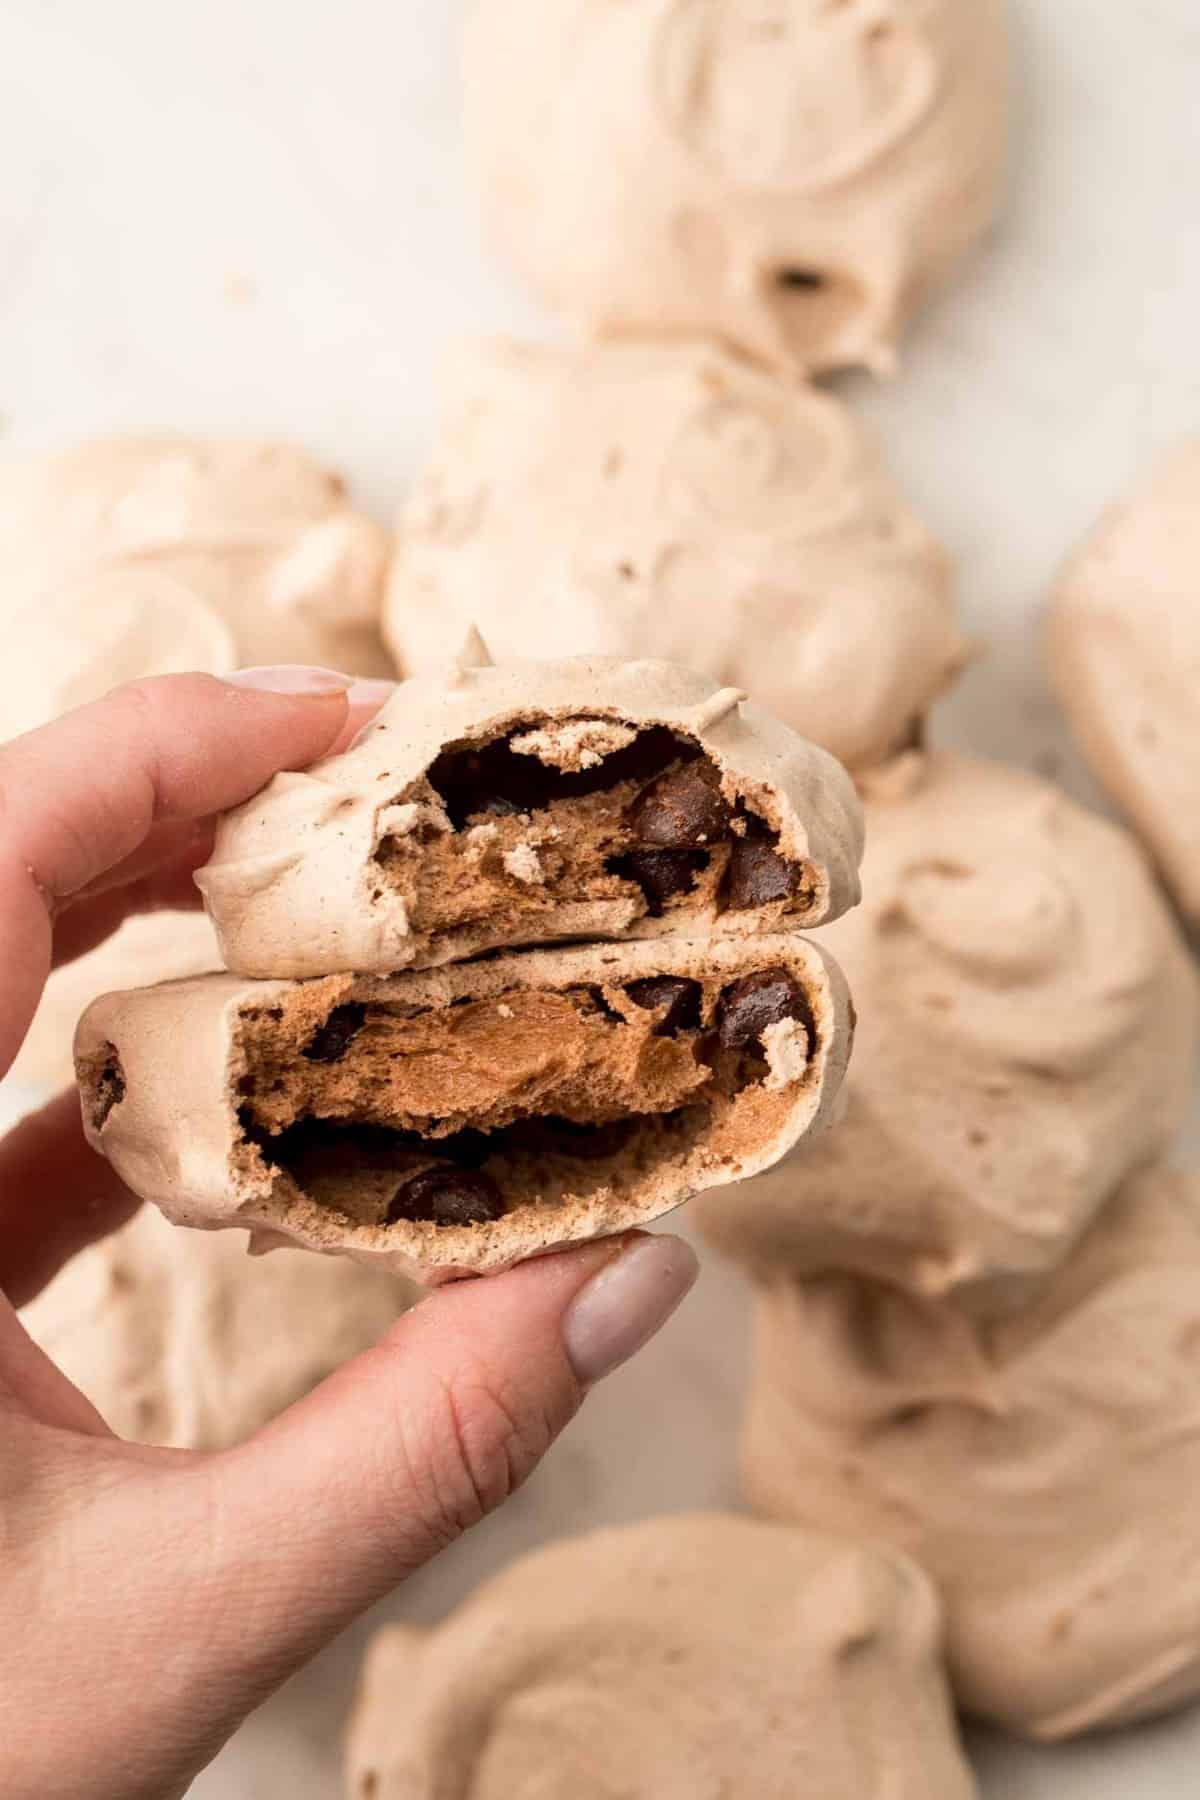 Bit into chocolate meringue cookies to show thick chocolate center.